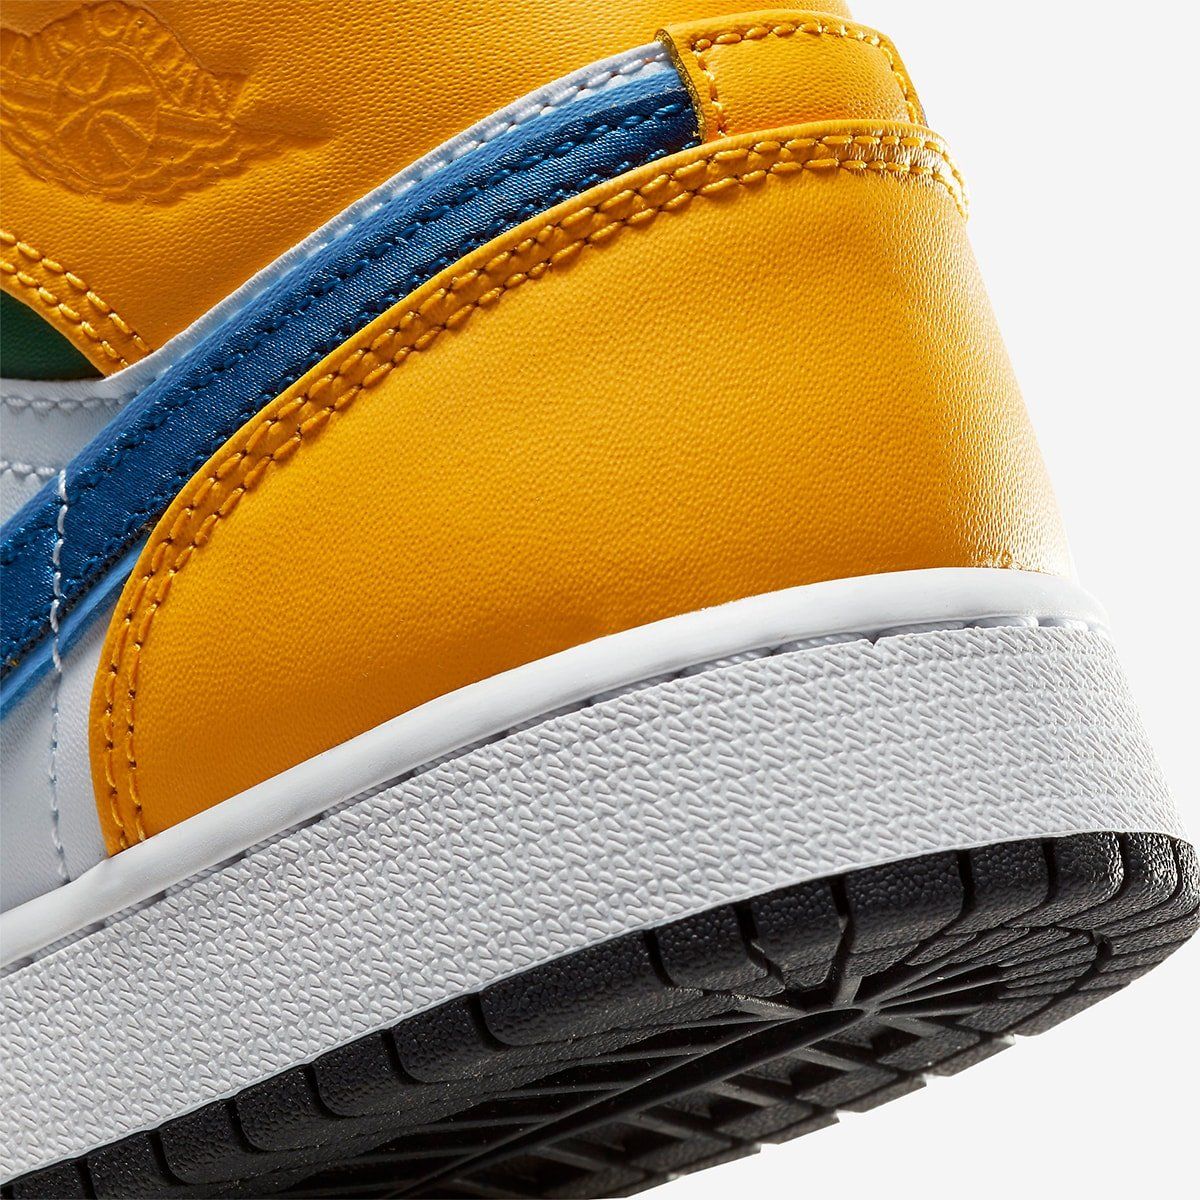 The Air Jordan 1 Mid Gets a Mismatched Makeover | HOUSE OF HEAT